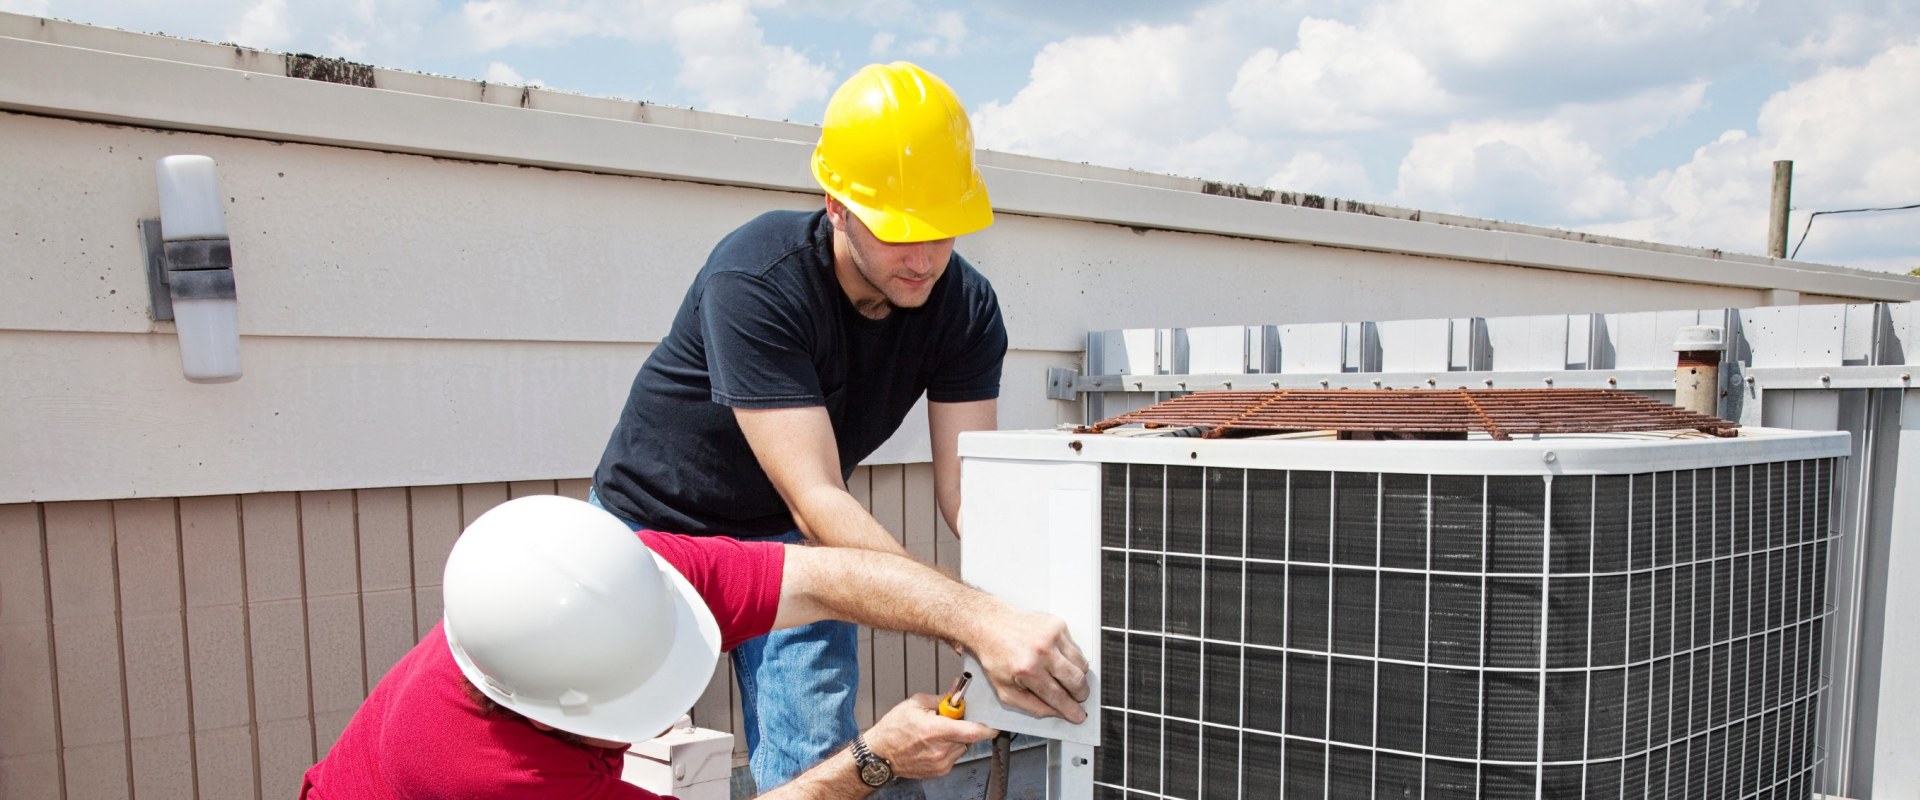 Becoming an HVAC Technician: What Training is Needed to Succeed?